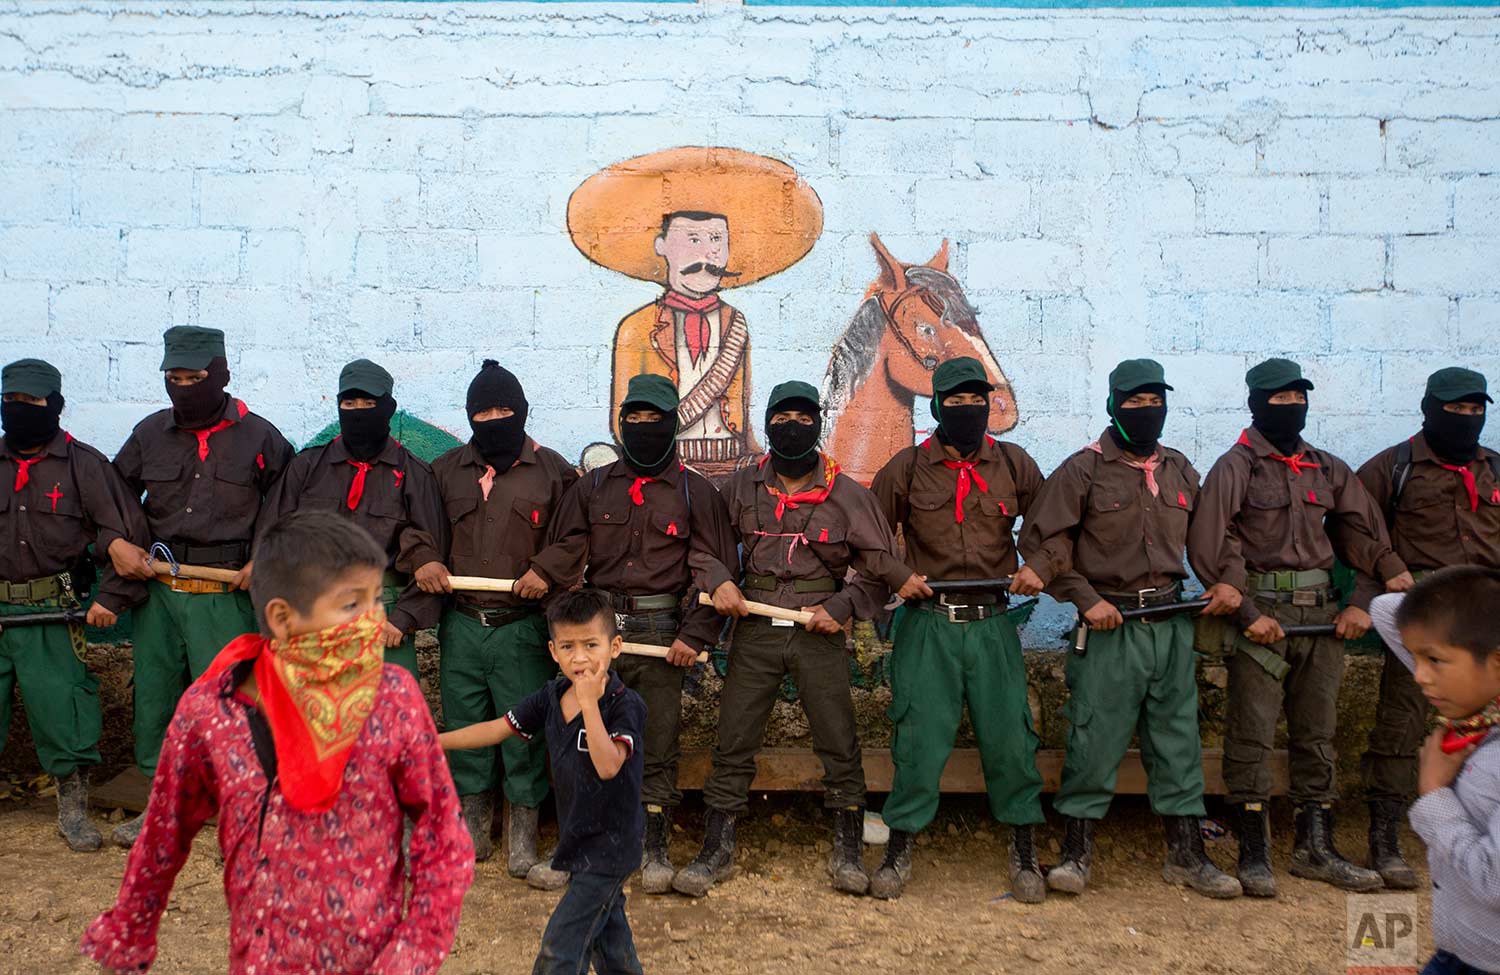  In this Monday, Oct. 16, 2017 photo, members of the Zapatista National Liberation Army (EZLN) provide security for a campaign rally by presidential candidate for the National Indigenous Congress, Maria de Jesus Patricio, in the Zapatista stronghold of La Garrucha in the southern state of Chiapas, Mexico. (AP Photo/Eduardo Verdugo) 